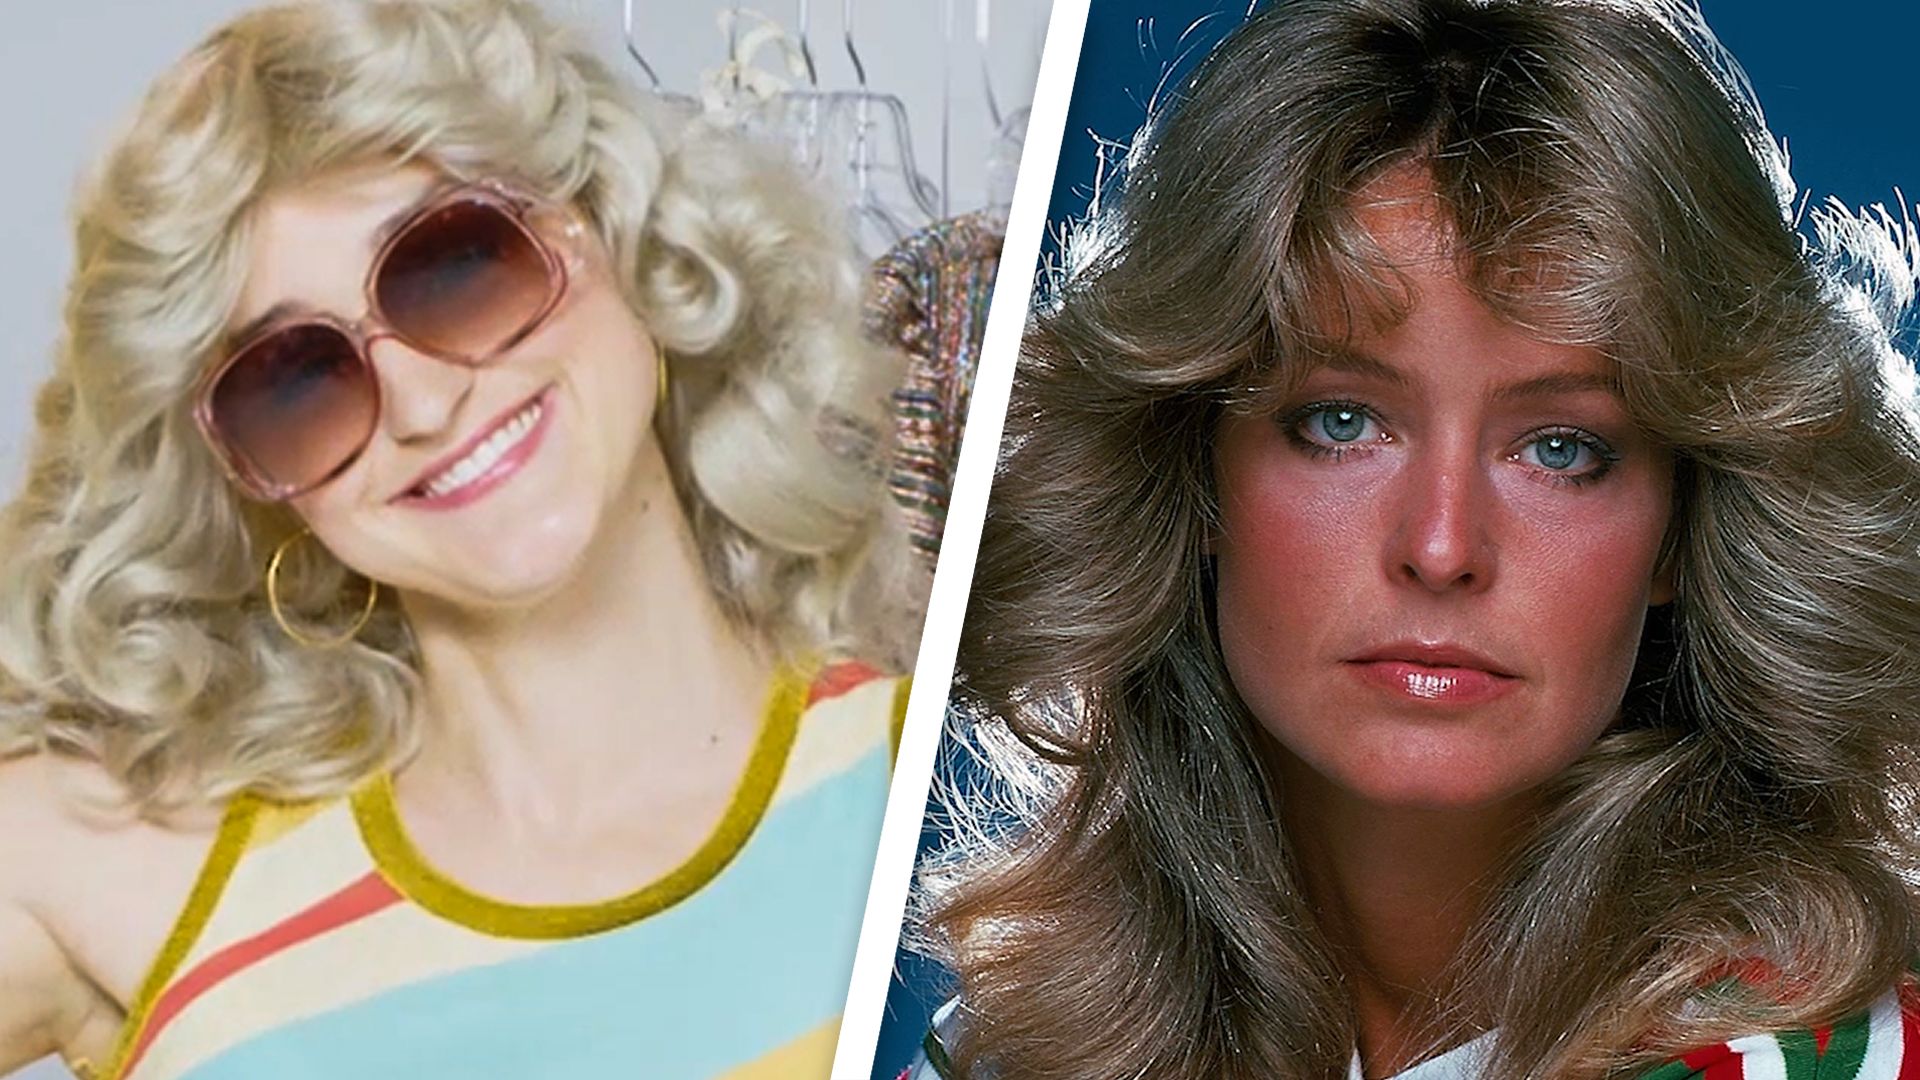 Watch I Tried Every Iconic 1970s Look in 48 Hours